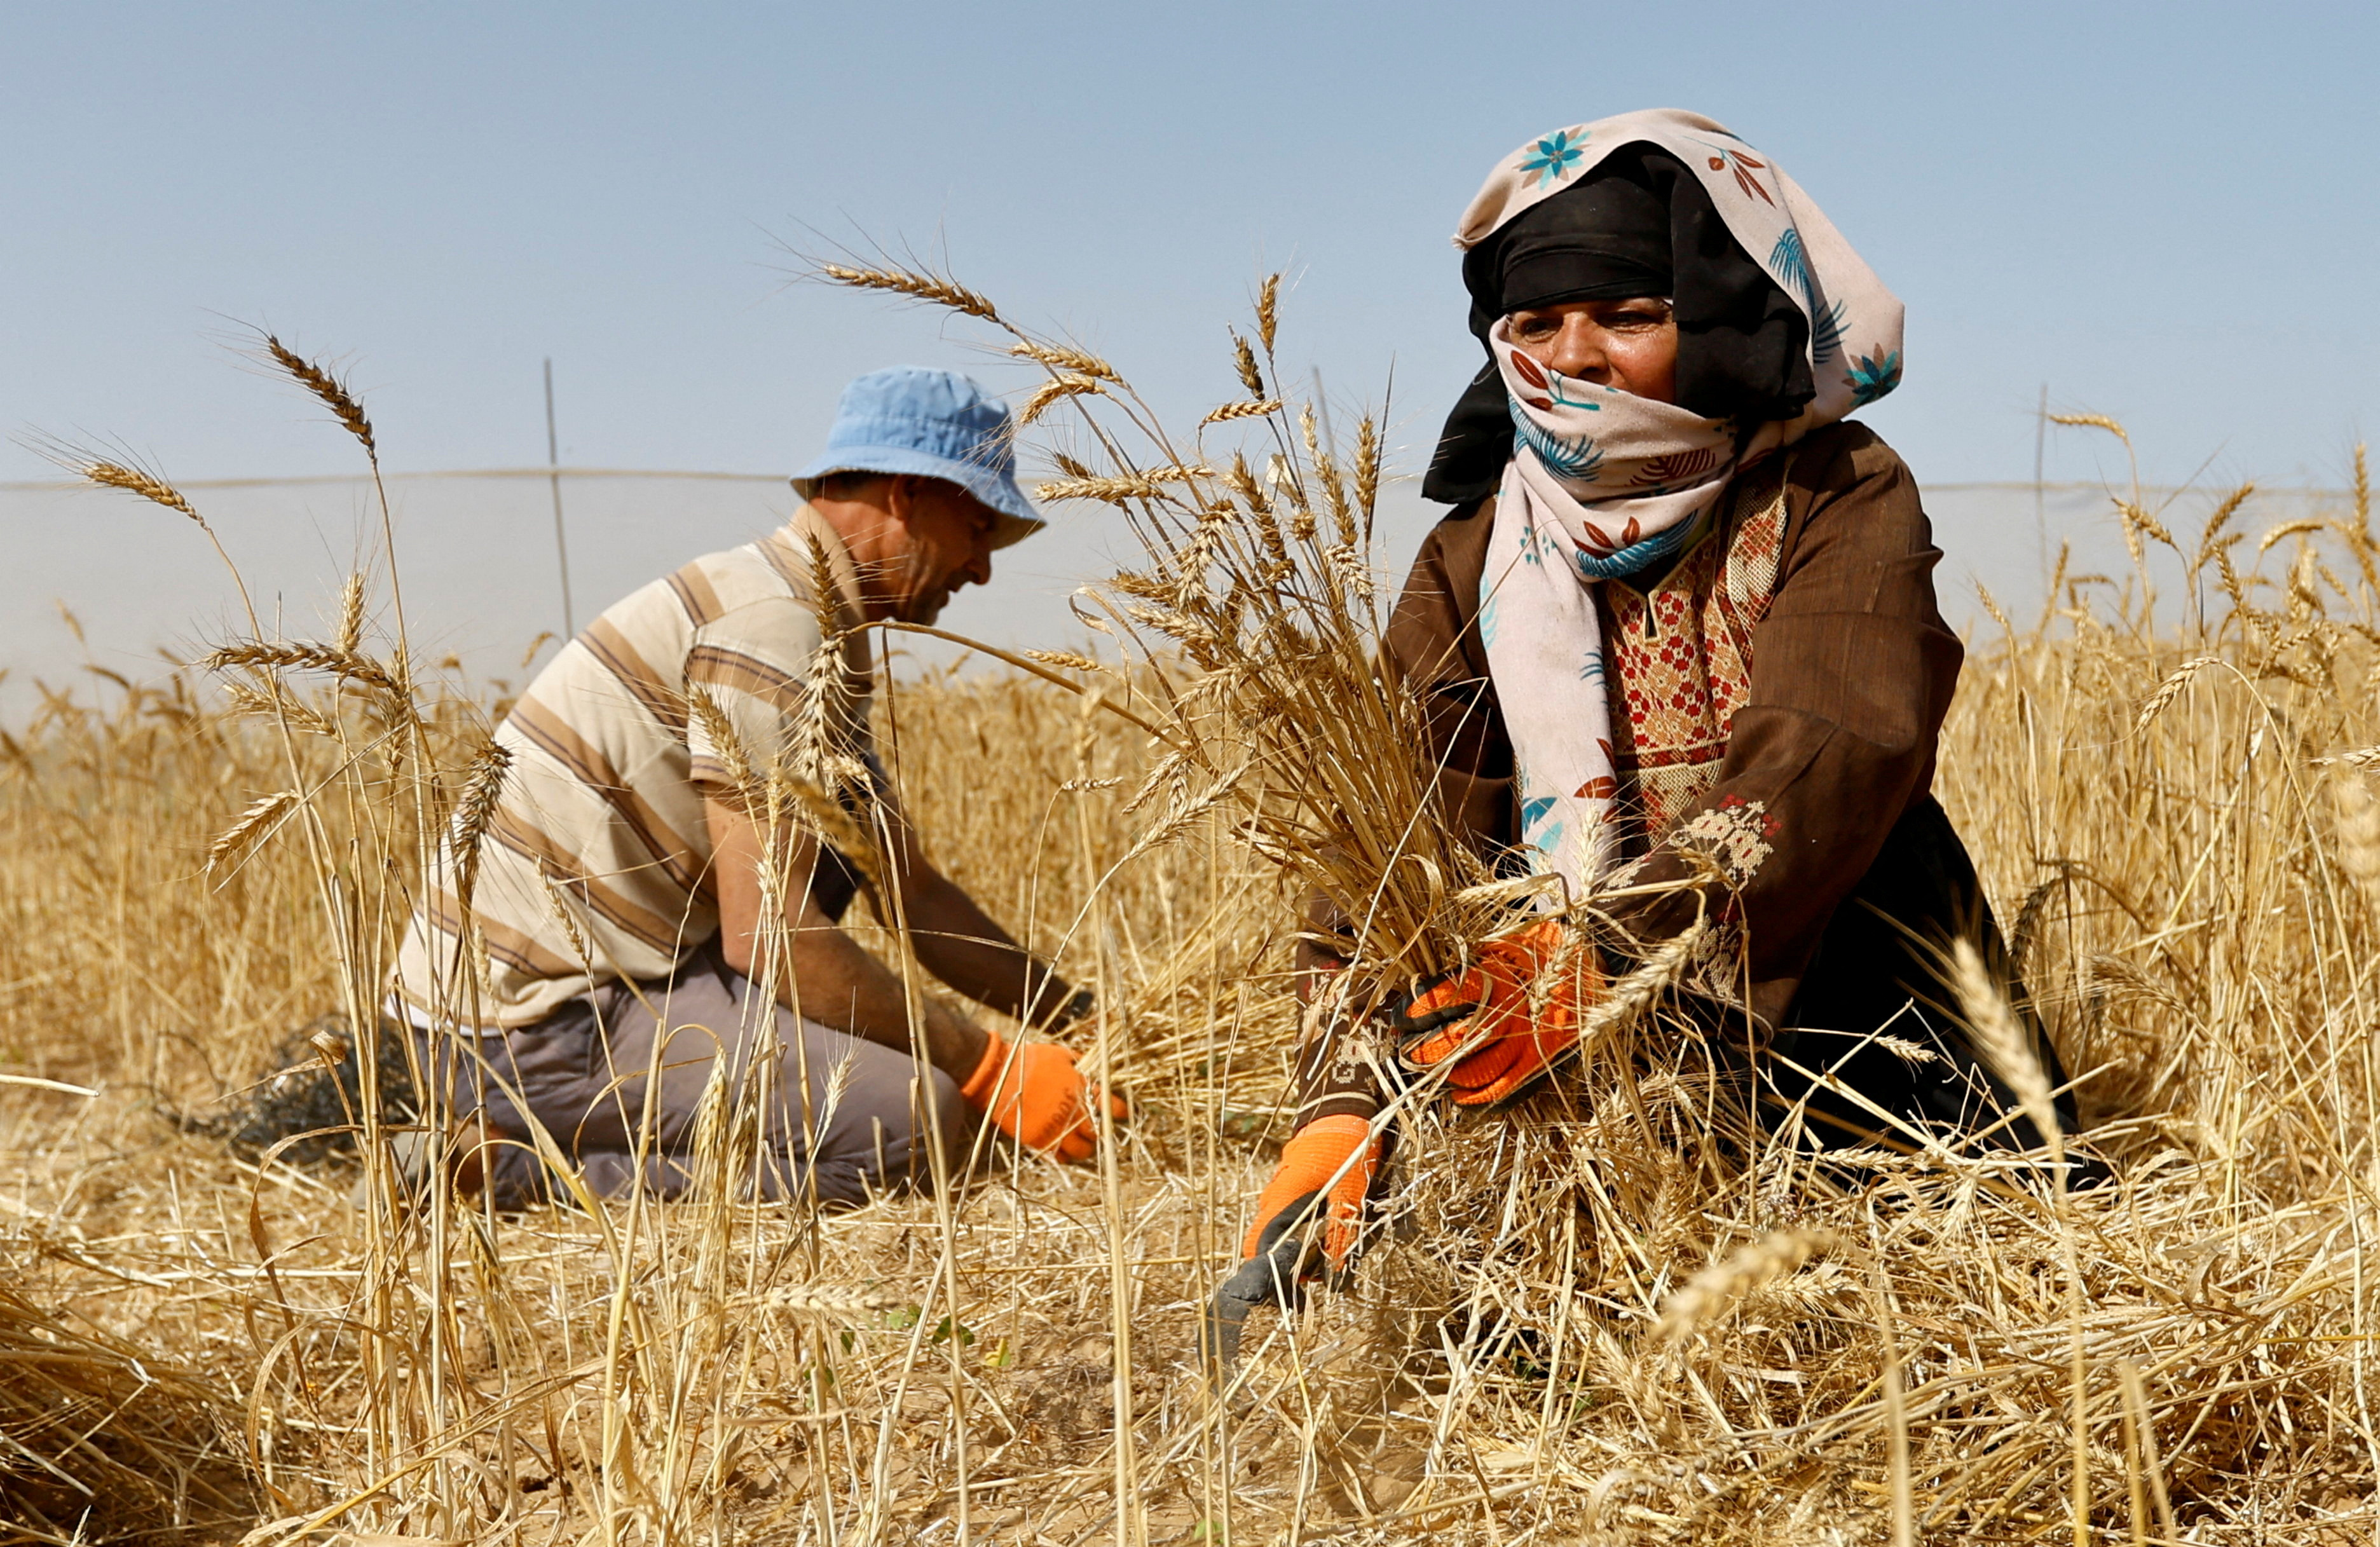 A Palestinian couple collects wheat during harvest season on a farm in Khan Younis